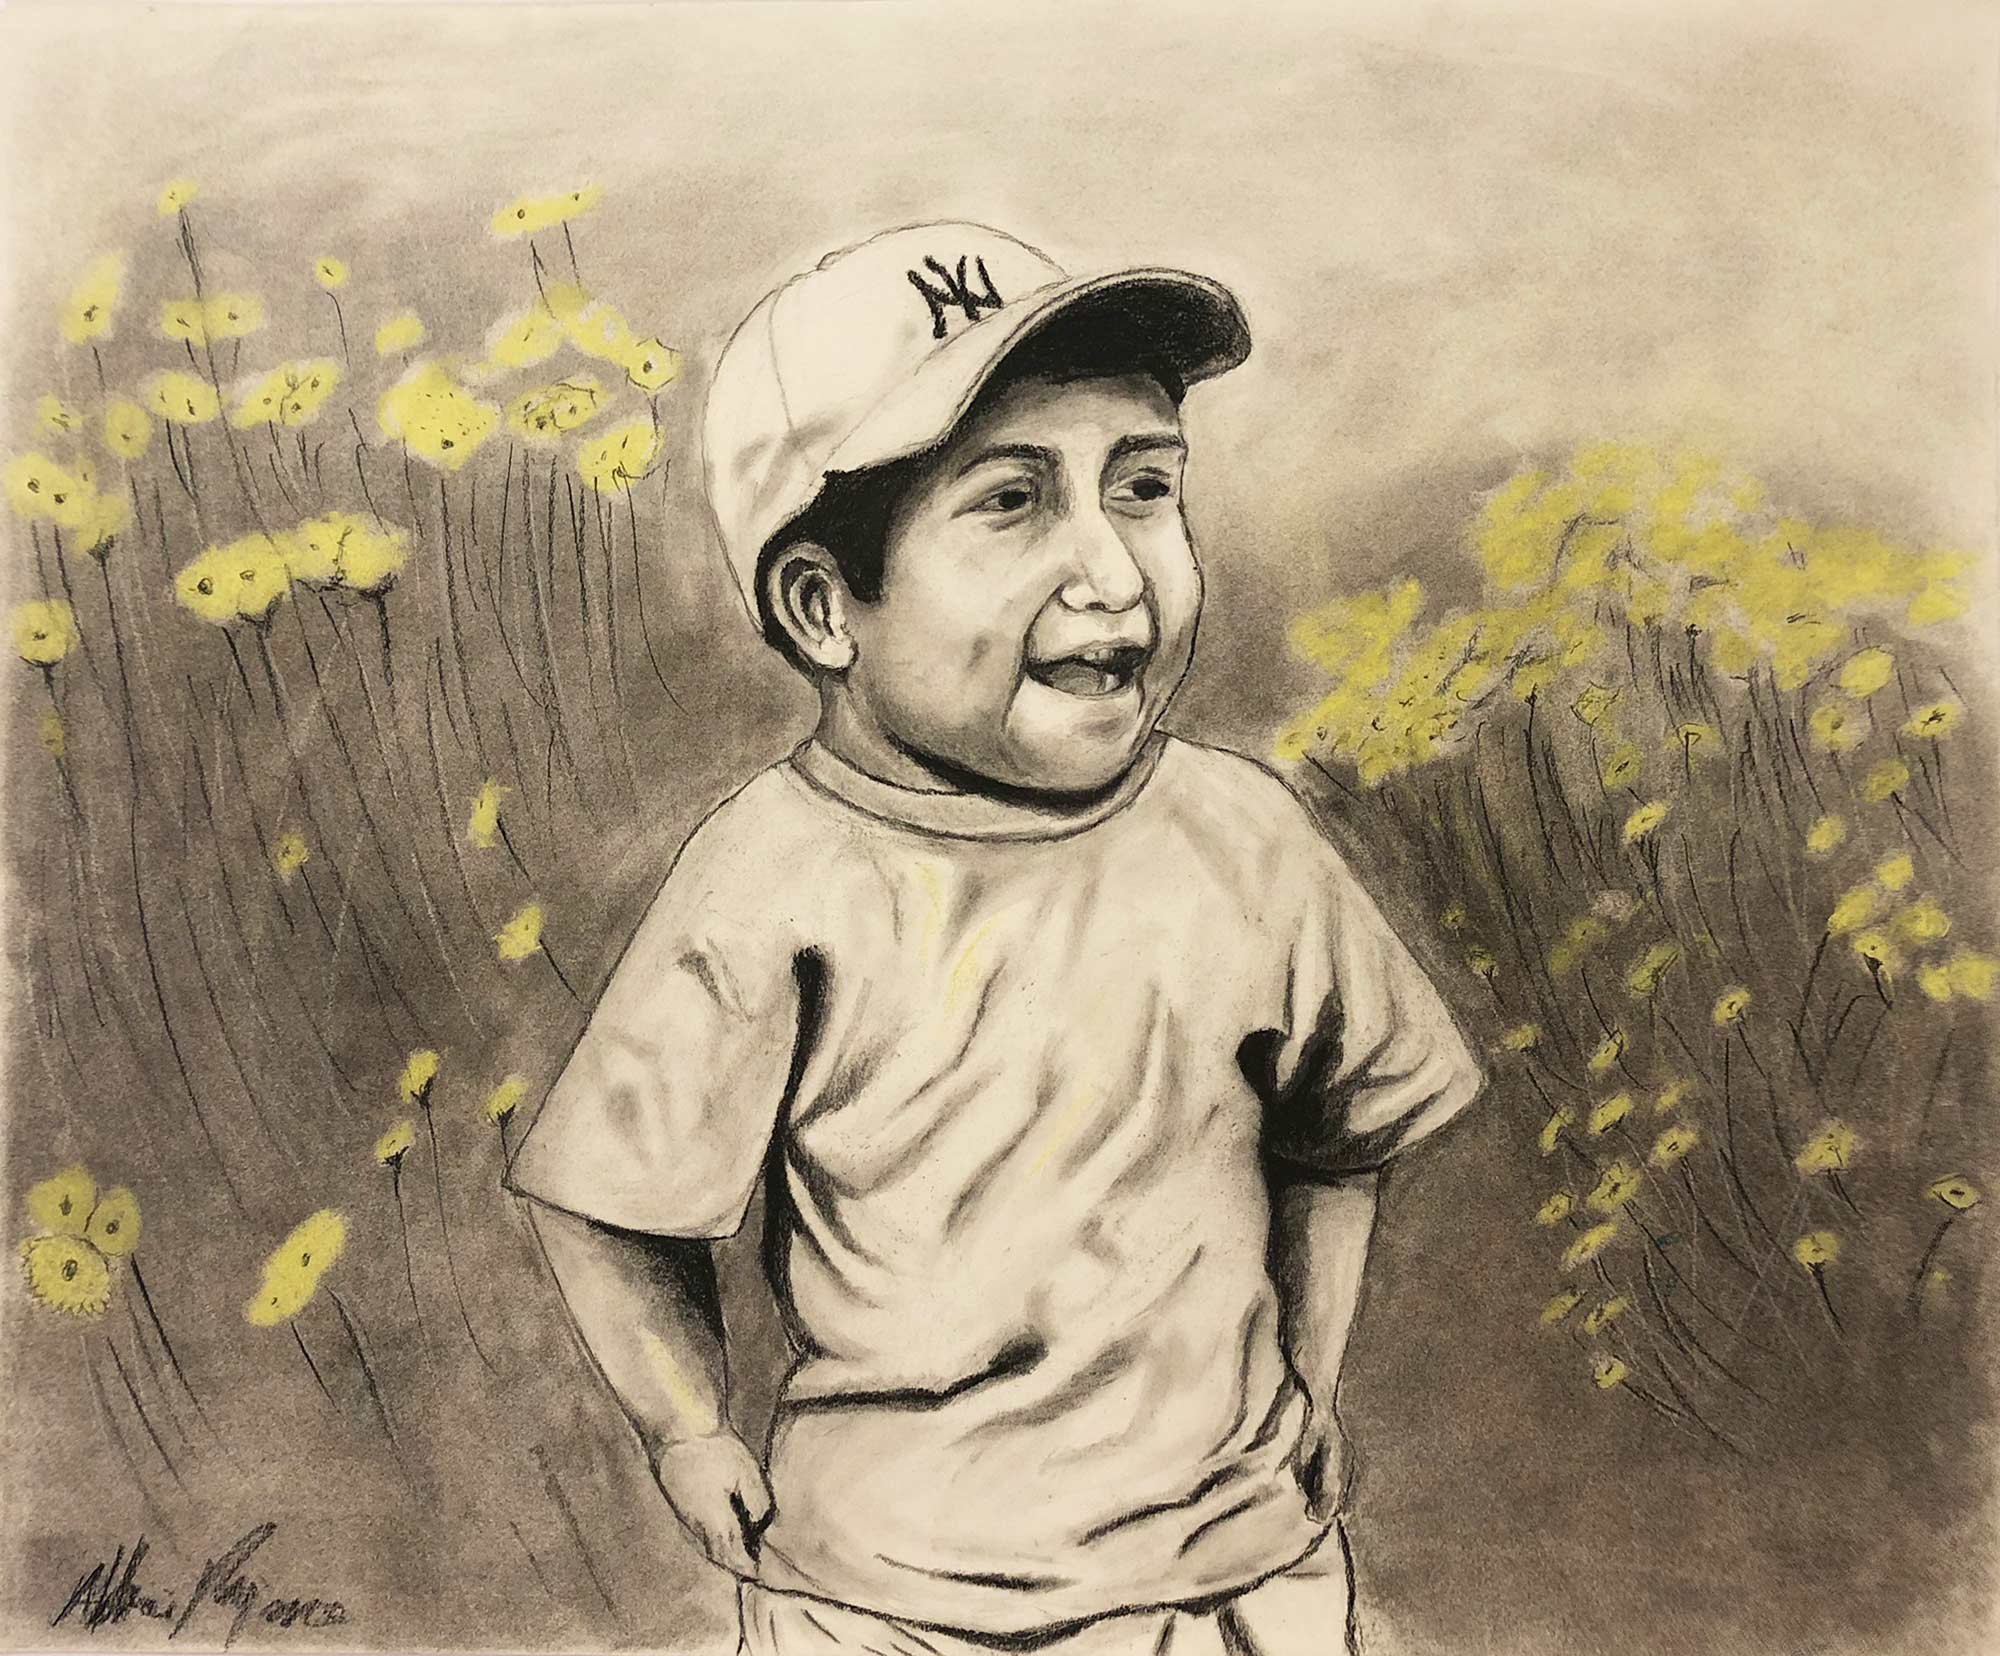 A charcoal drawing of a boy